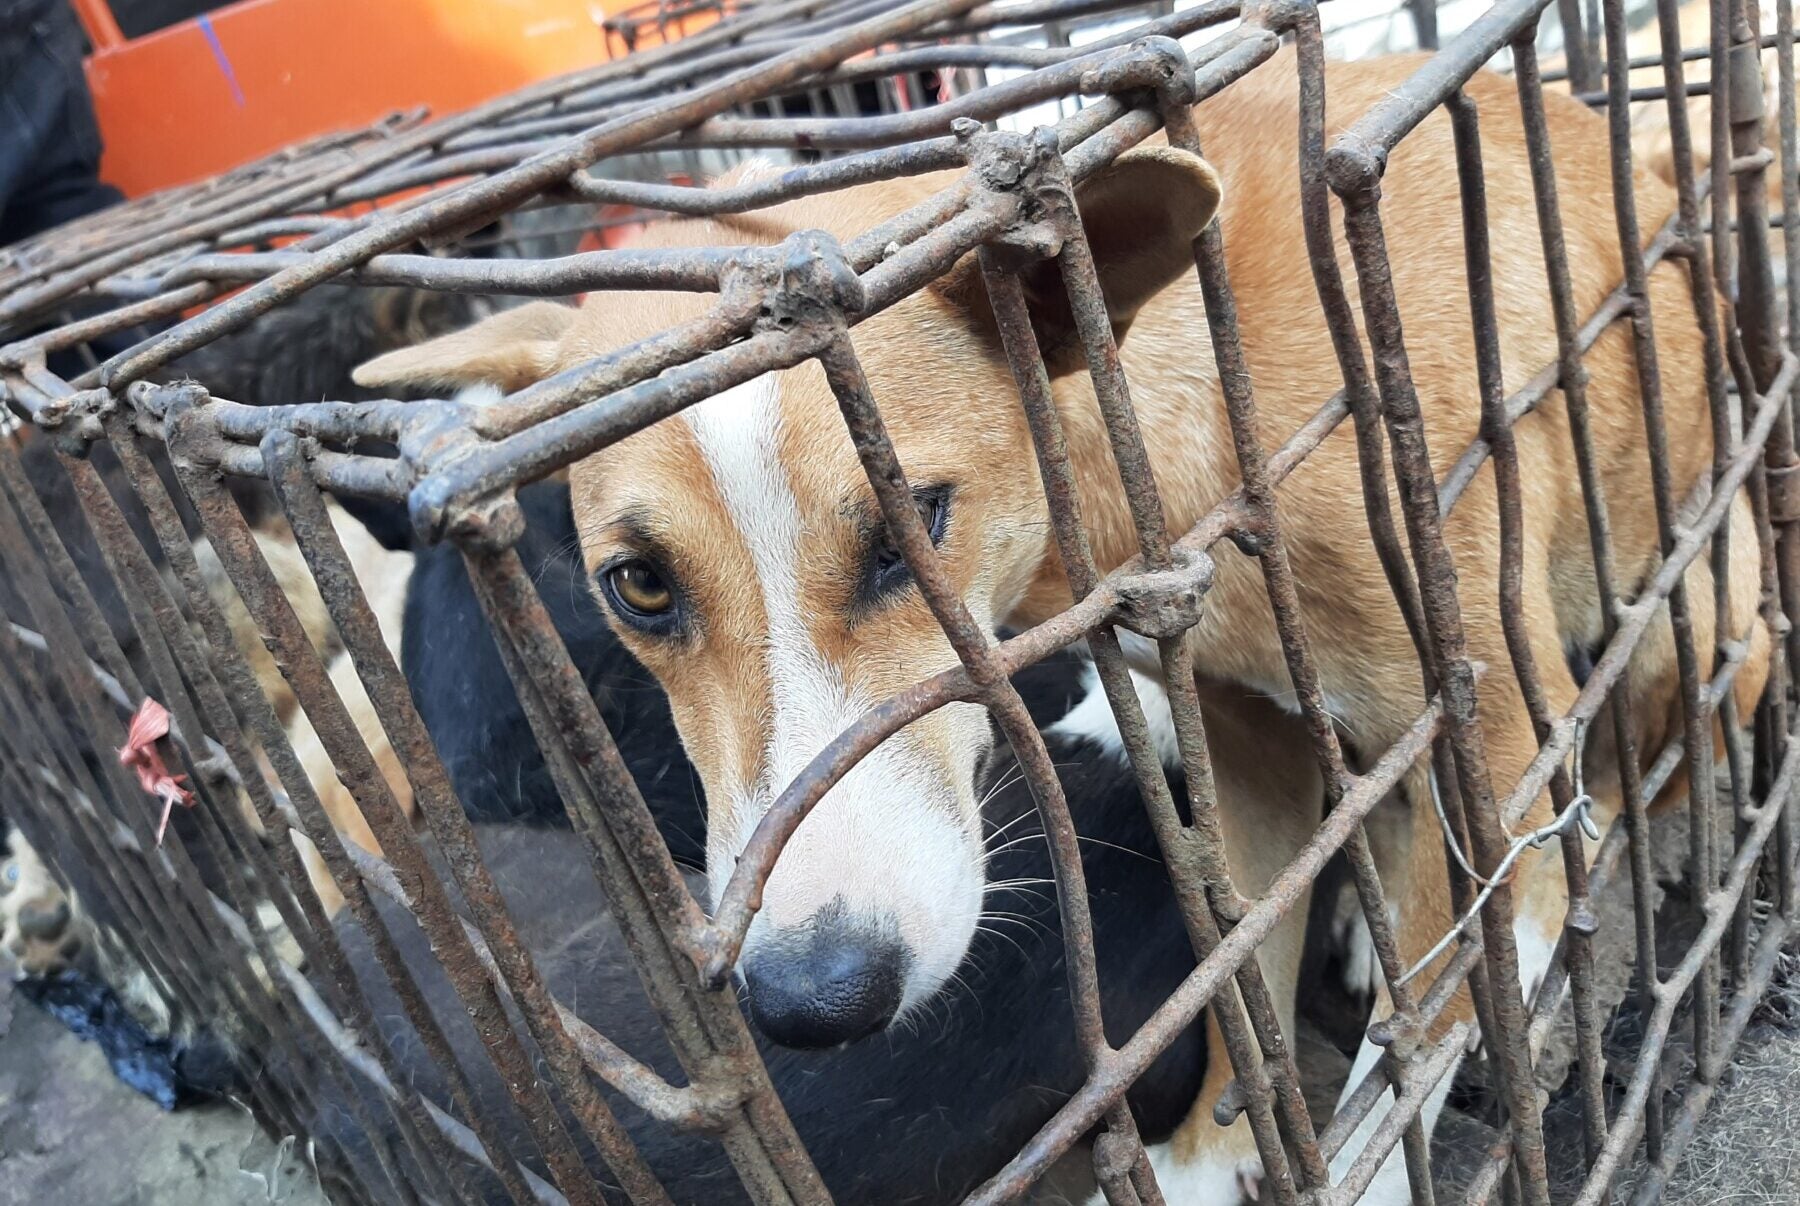 Dogs in cage at Langowan Market Indonesia